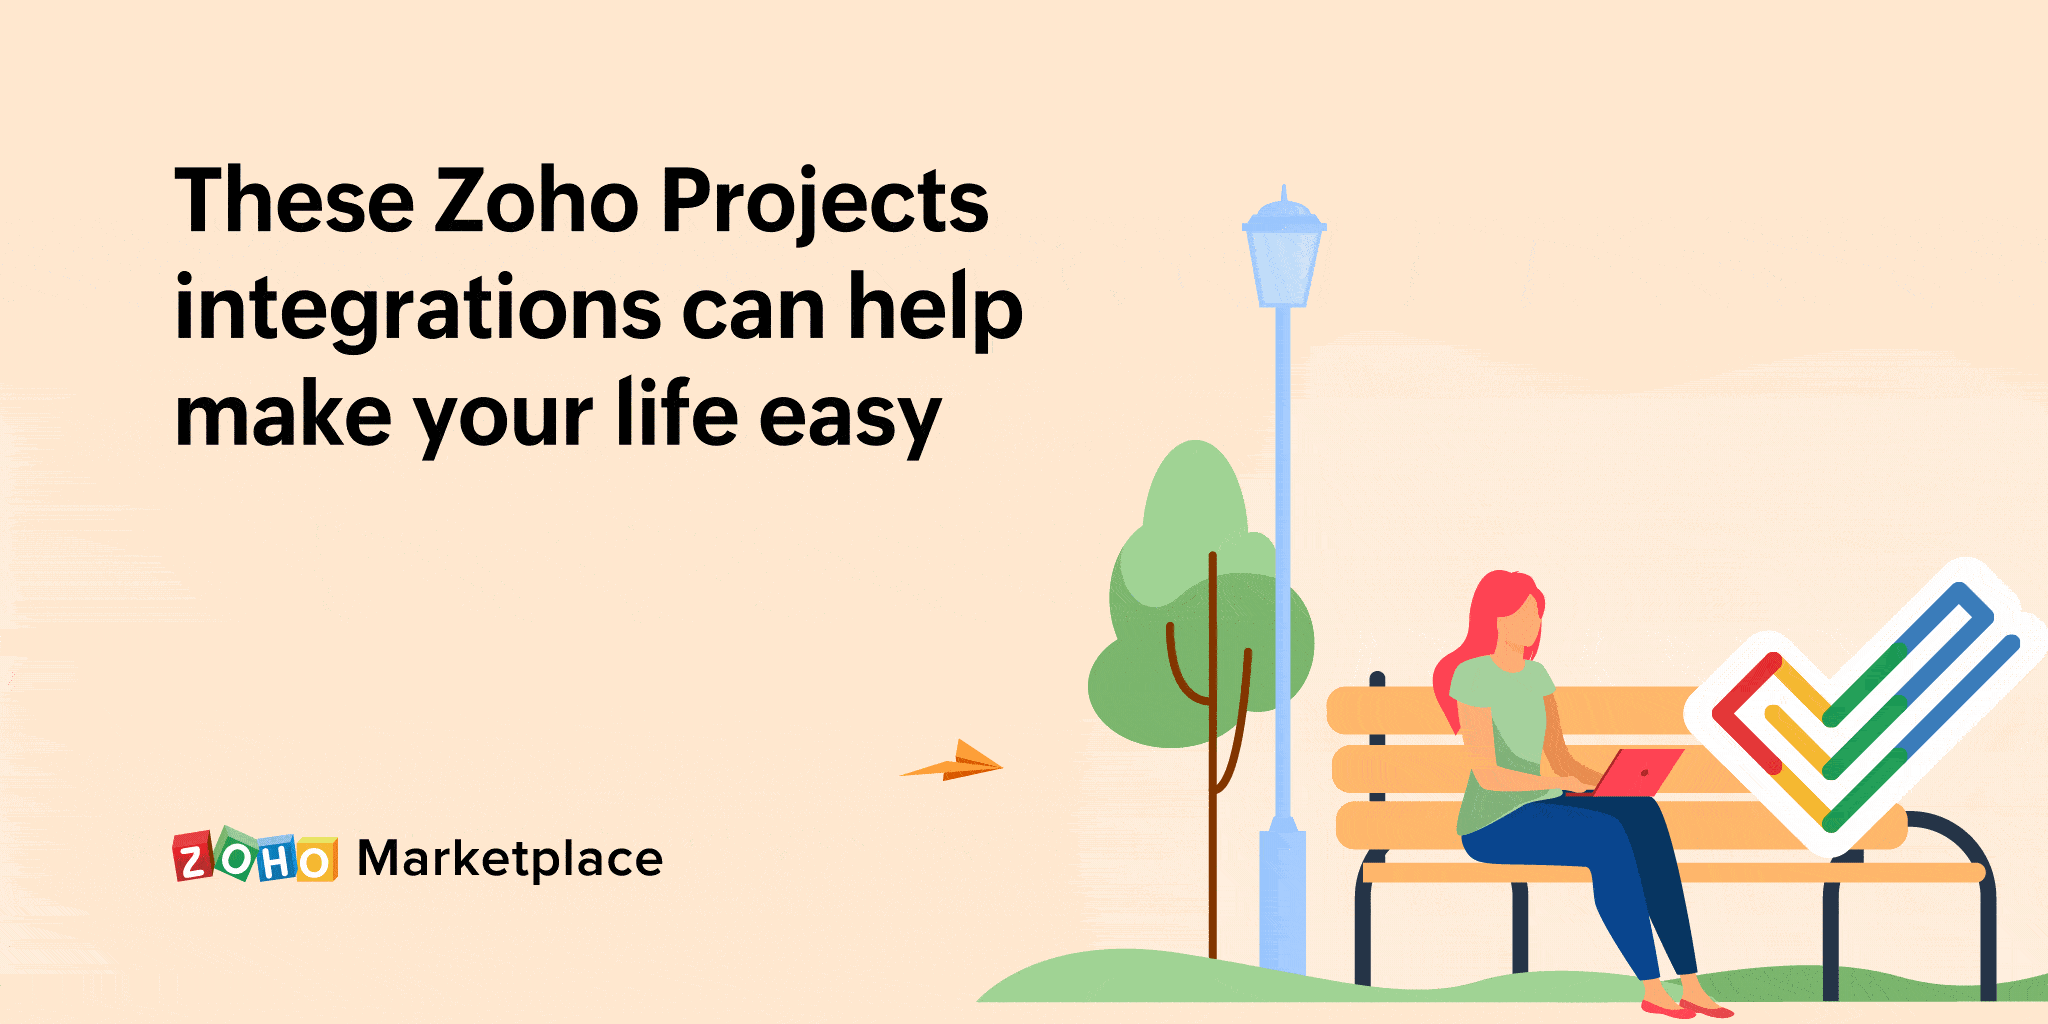 These Zoho Projects integrations can help make your life easy